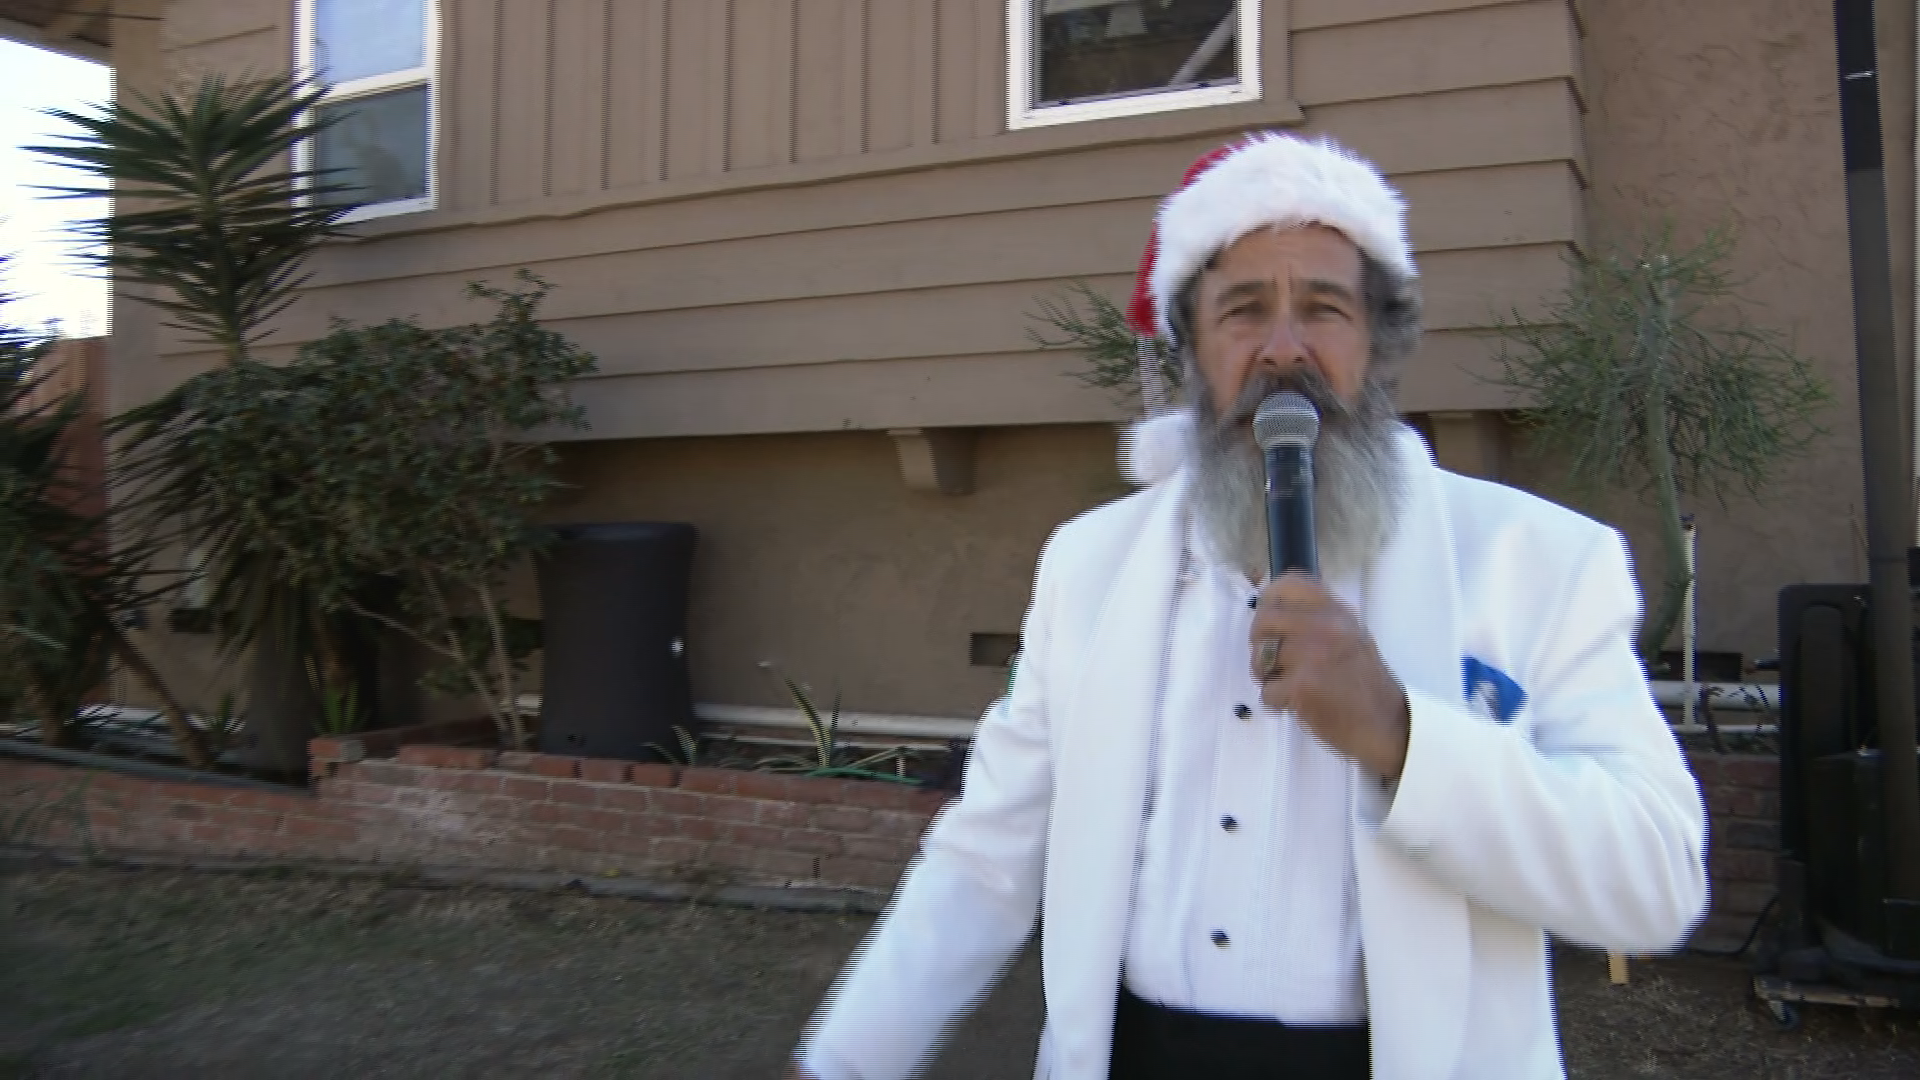 COVID put the Sinatra-style singer out of work so he grew out a Santa beard and kept on singing!